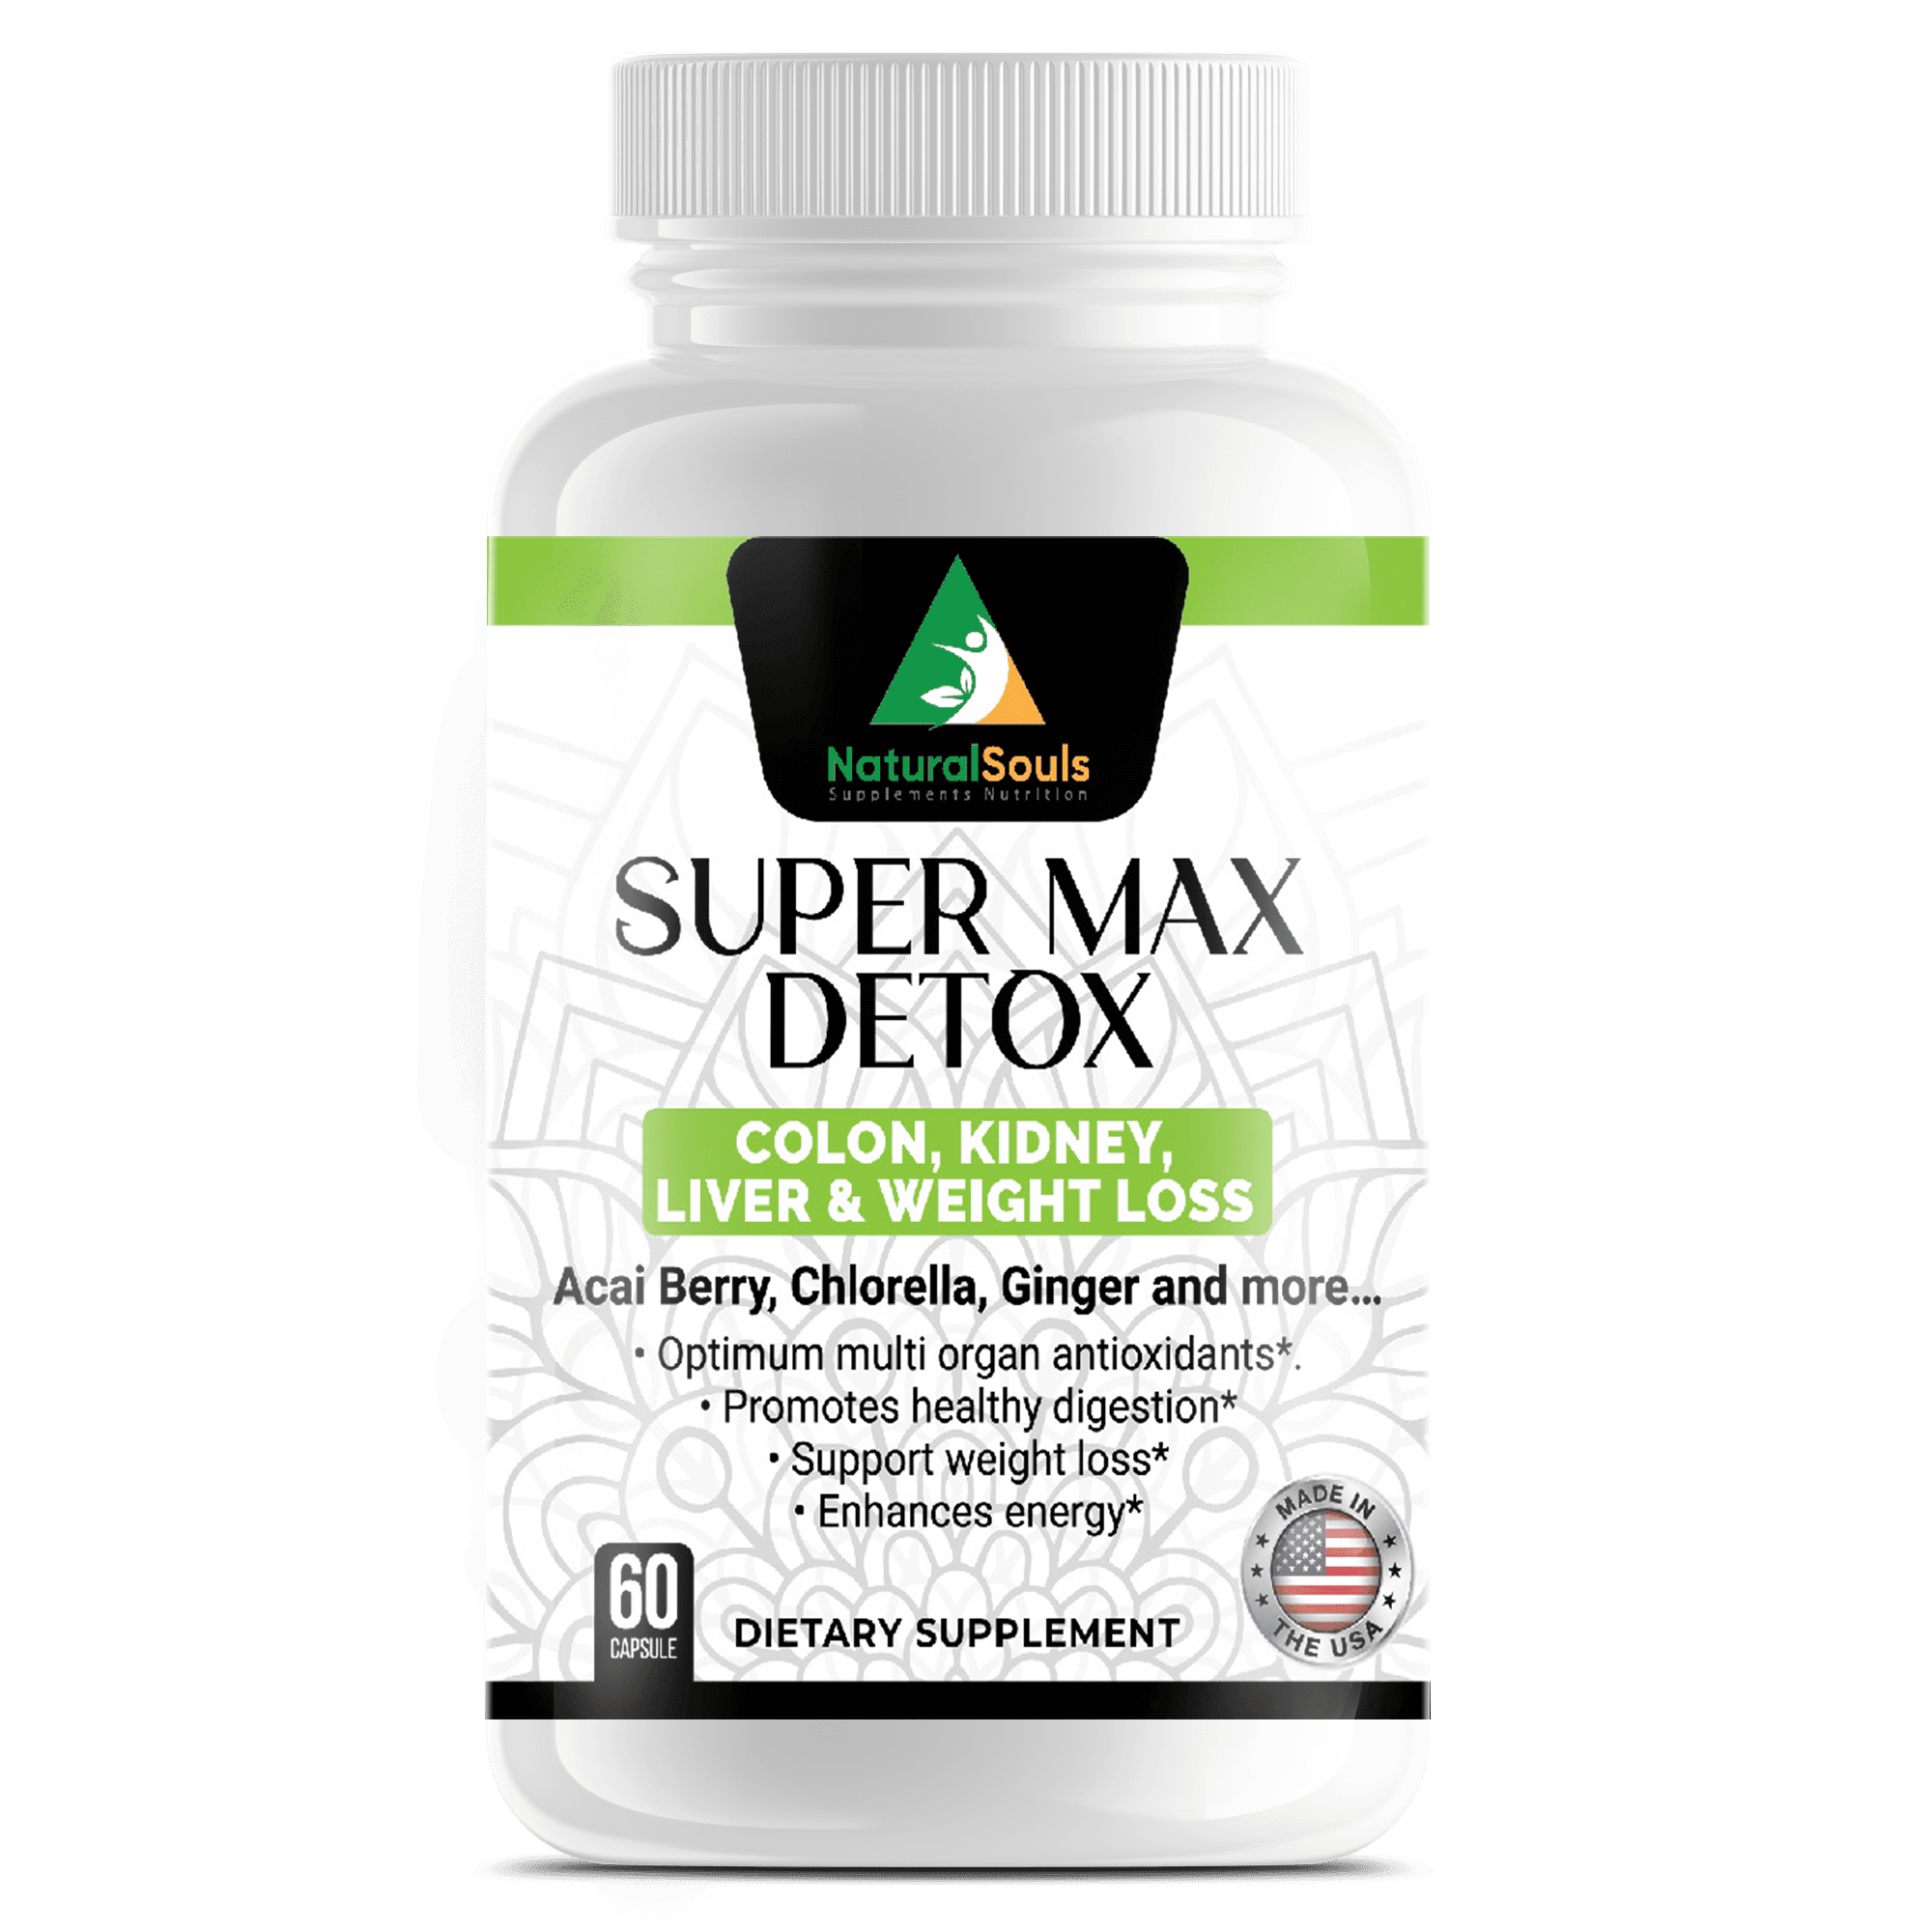 , Super Max Detox Supplement, Best for (Colon, Kidney, Liver Health and Weight Loss) .